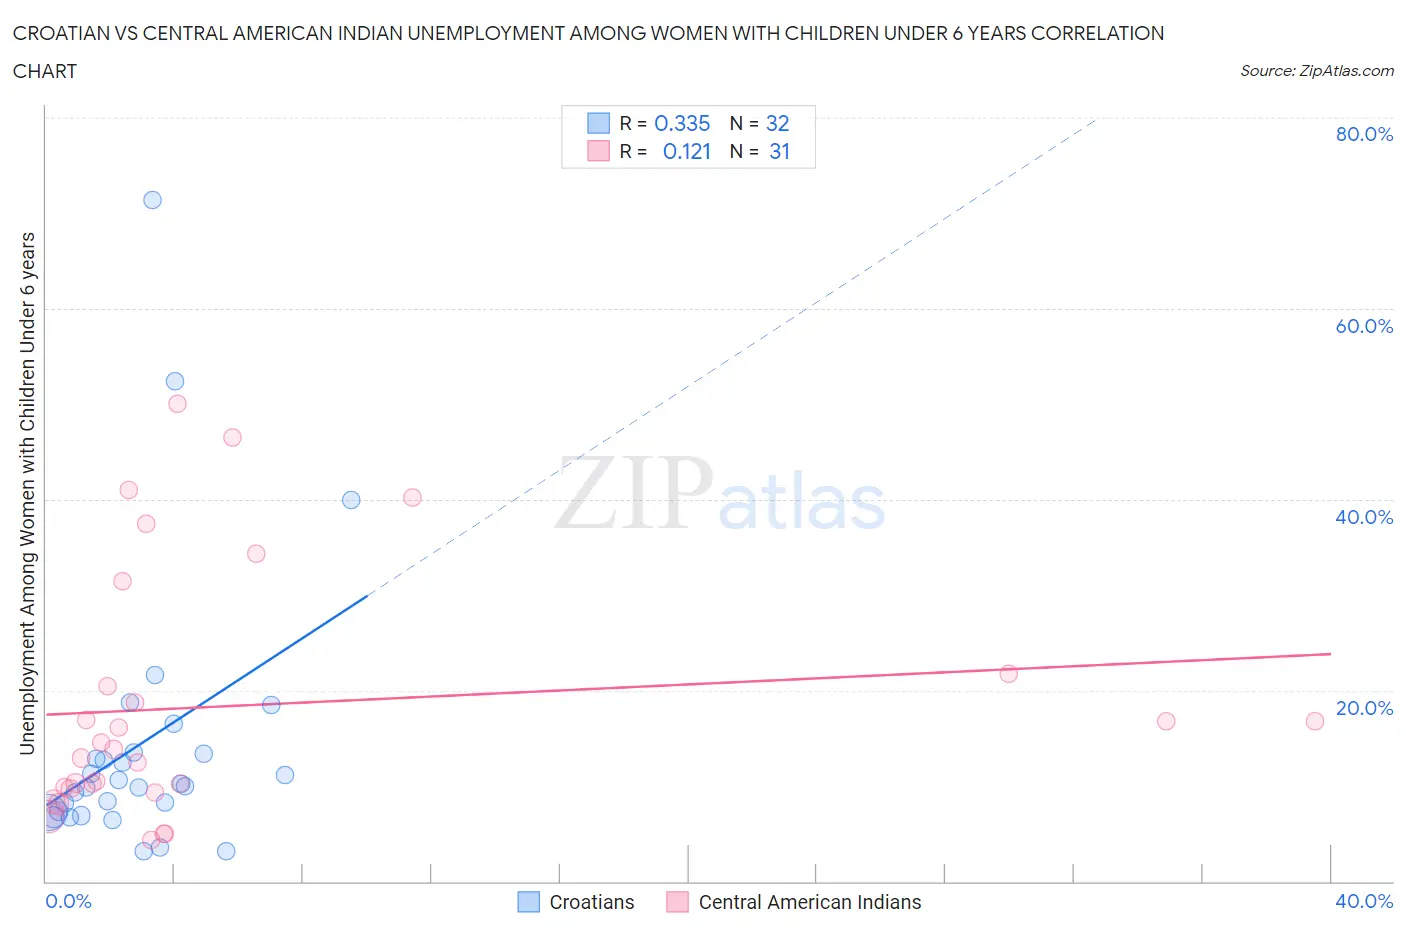 Croatian vs Central American Indian Unemployment Among Women with Children Under 6 years